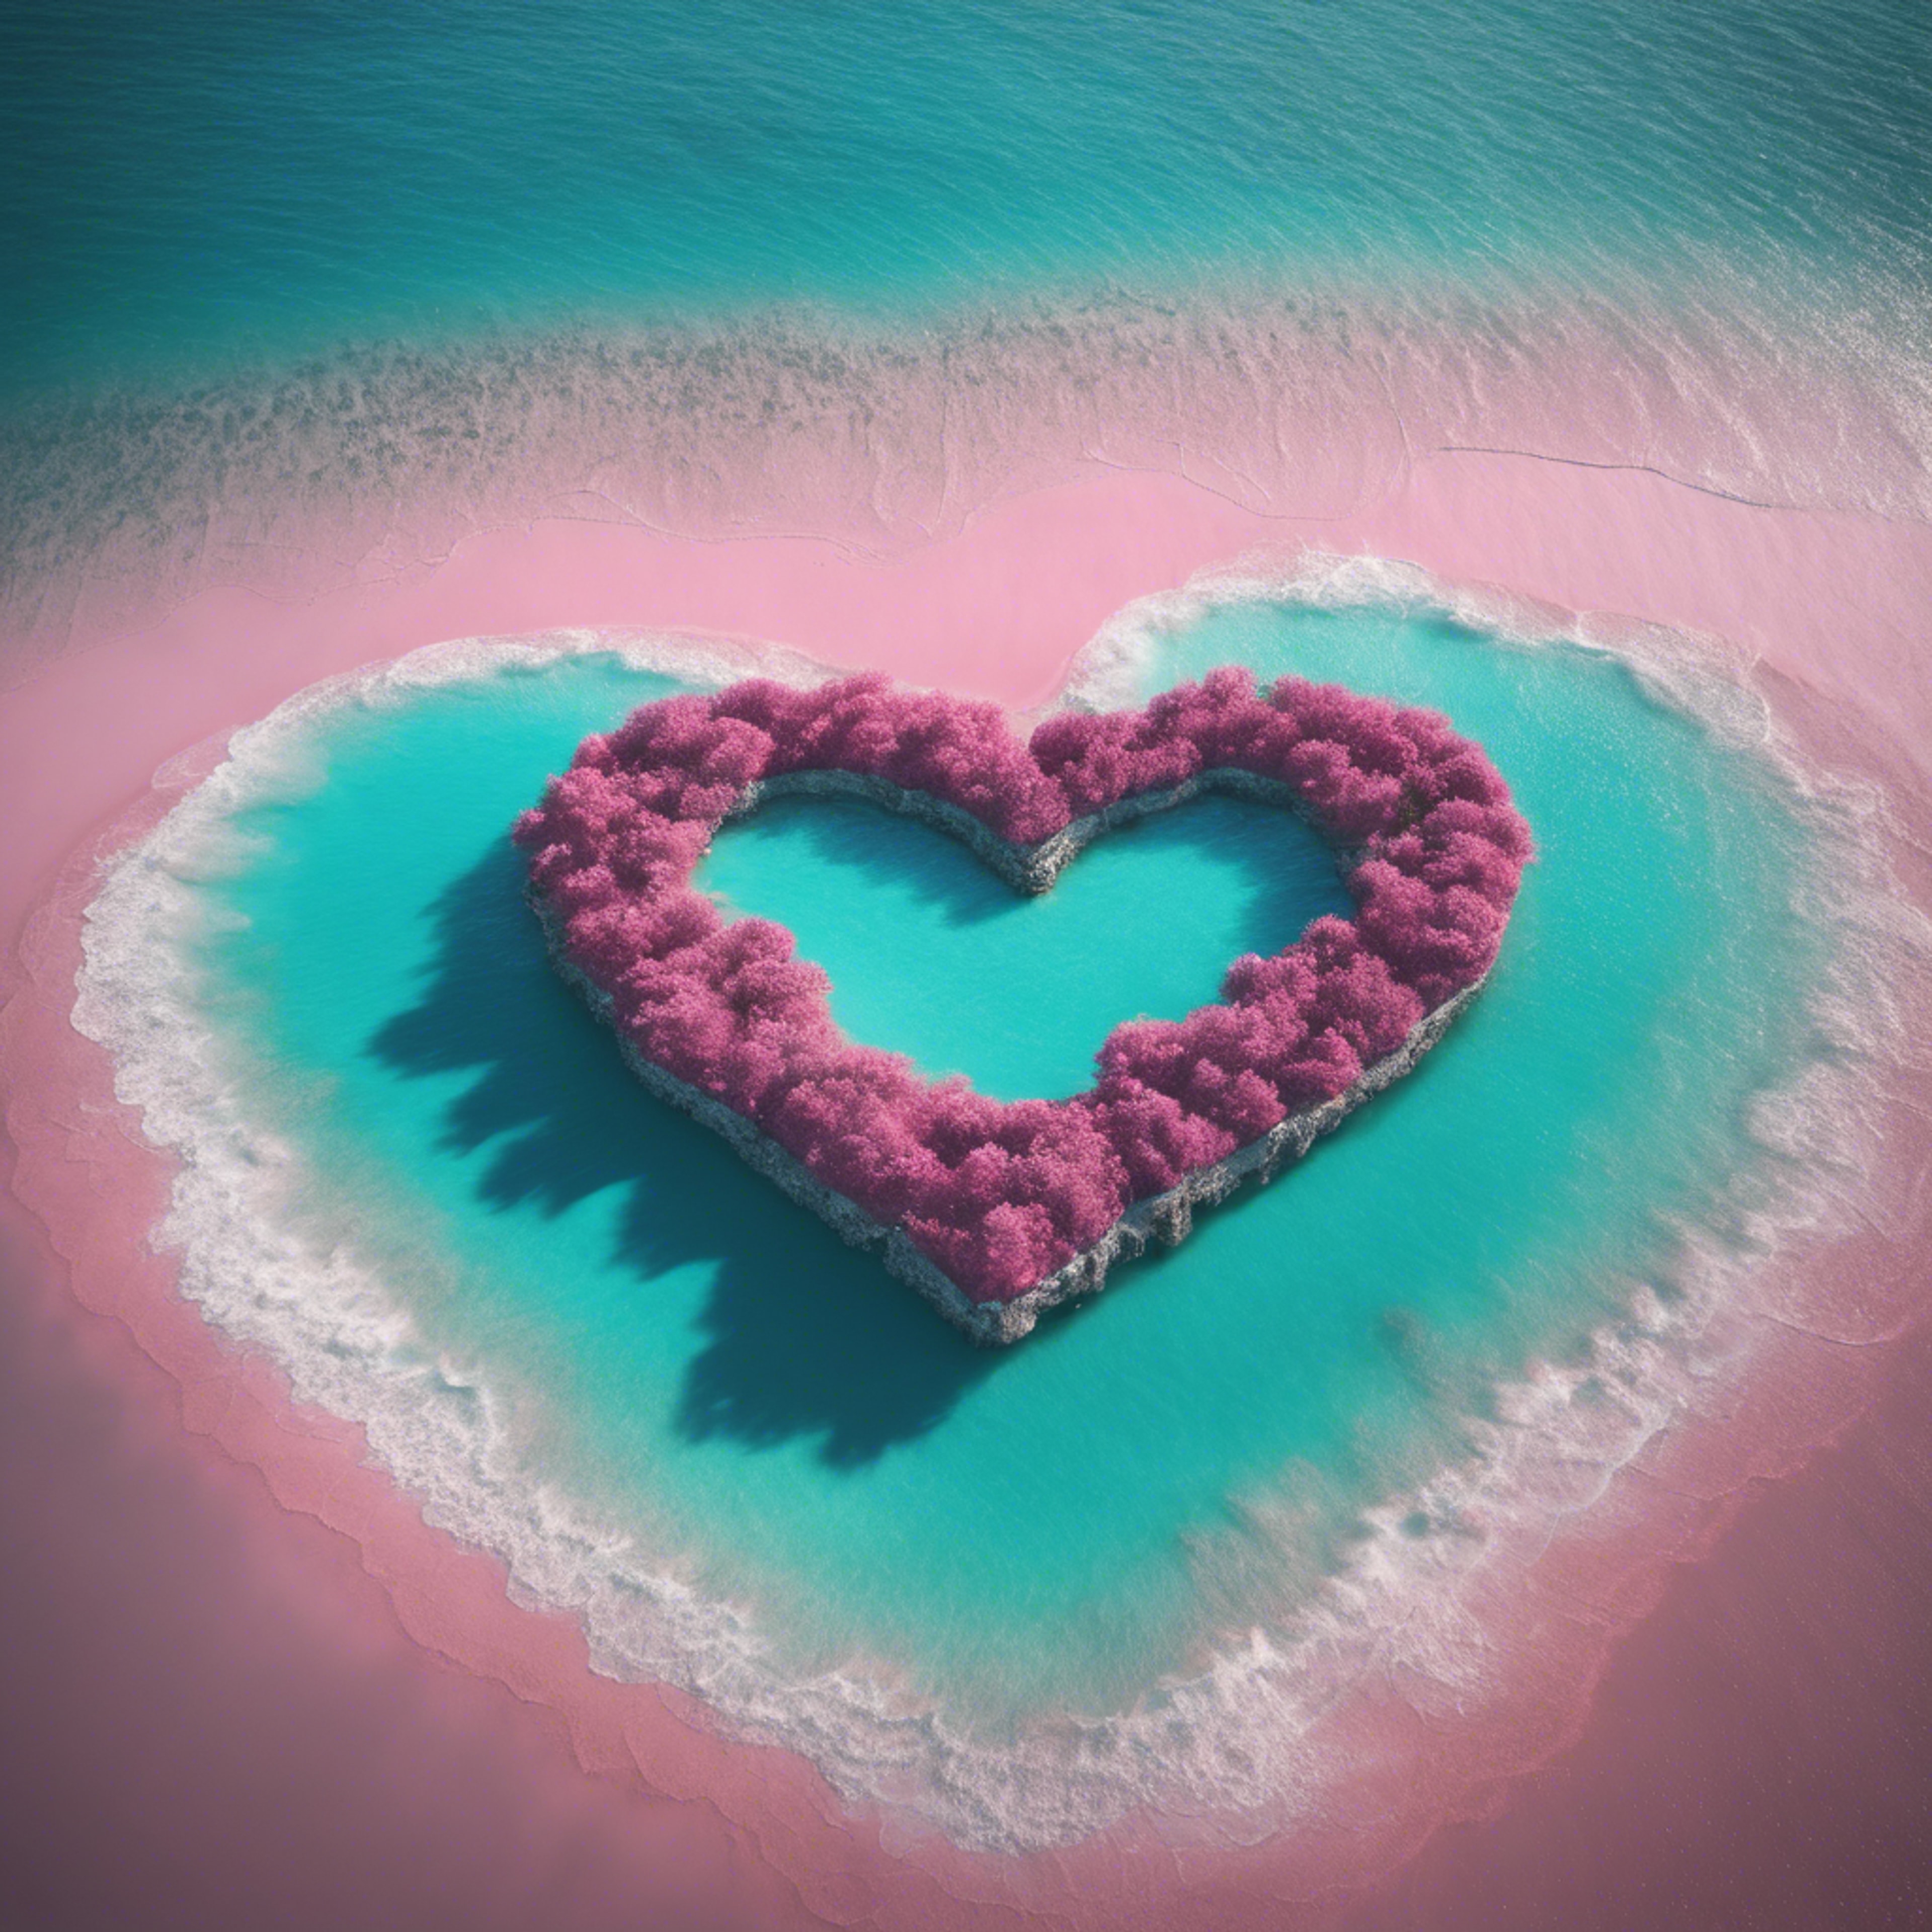 Small pink heart-shaped island in the middle of a vast turquoise ocean. Wallpaper[64913b0ebead428bb143]